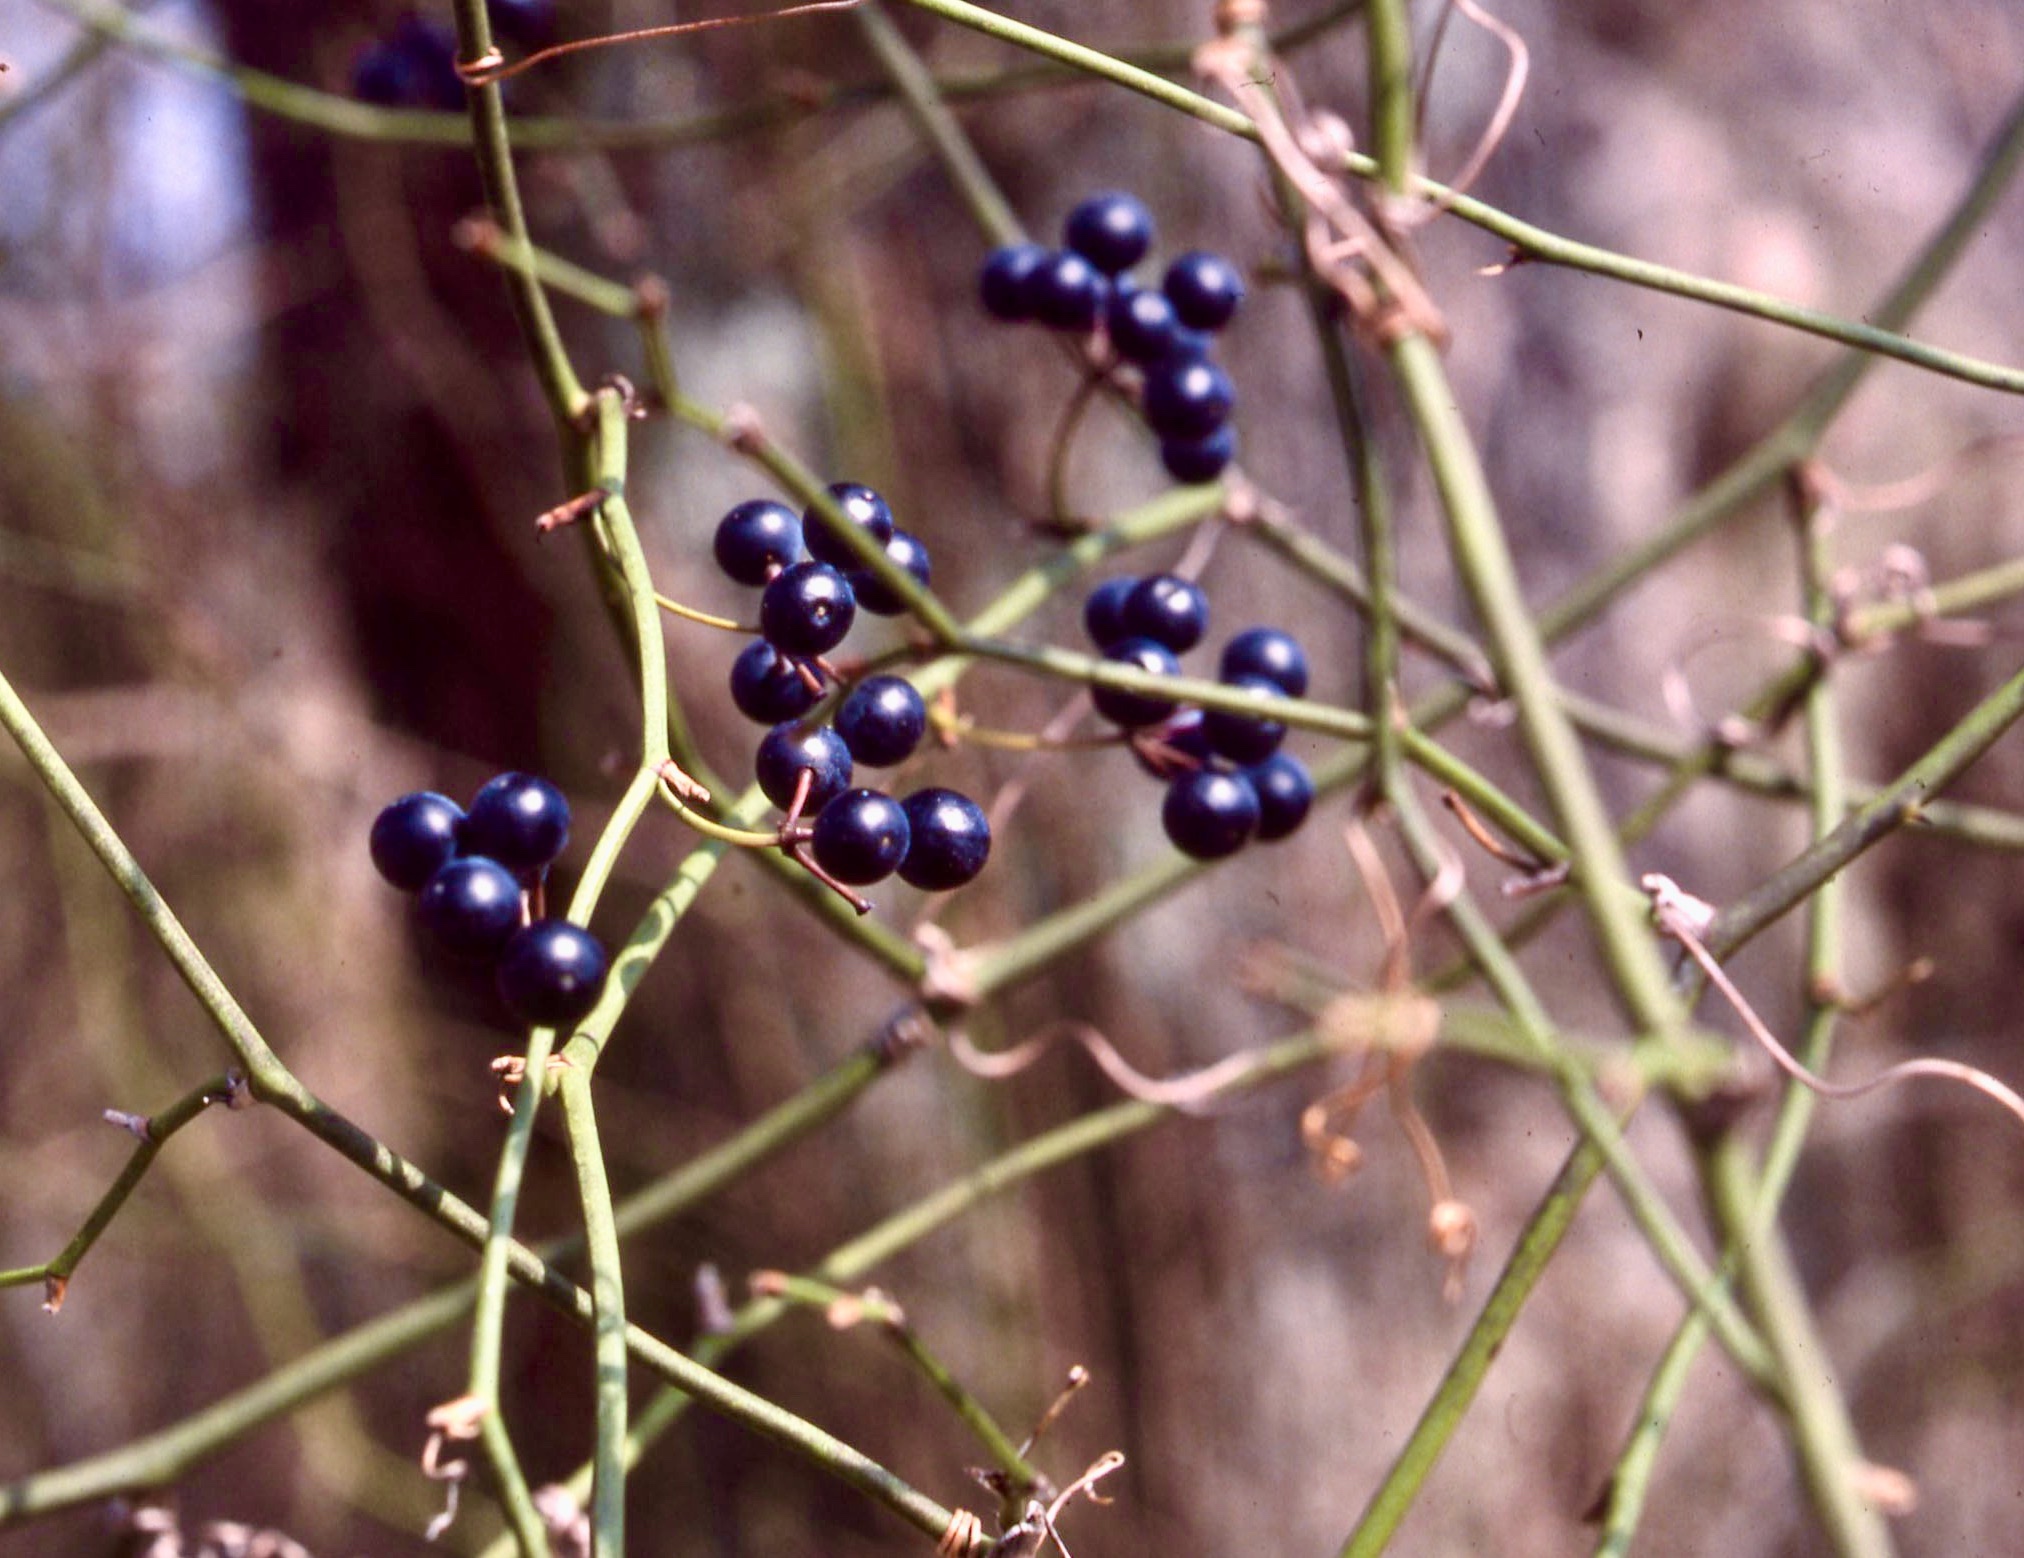 The Scientific Name is Smilax rotundifolia. You will likely hear them called Common Greenbriar, Bullbriar, Horsebriar. This picture shows the The blue-black fruit may persist well into winter of Smilax rotundifolia